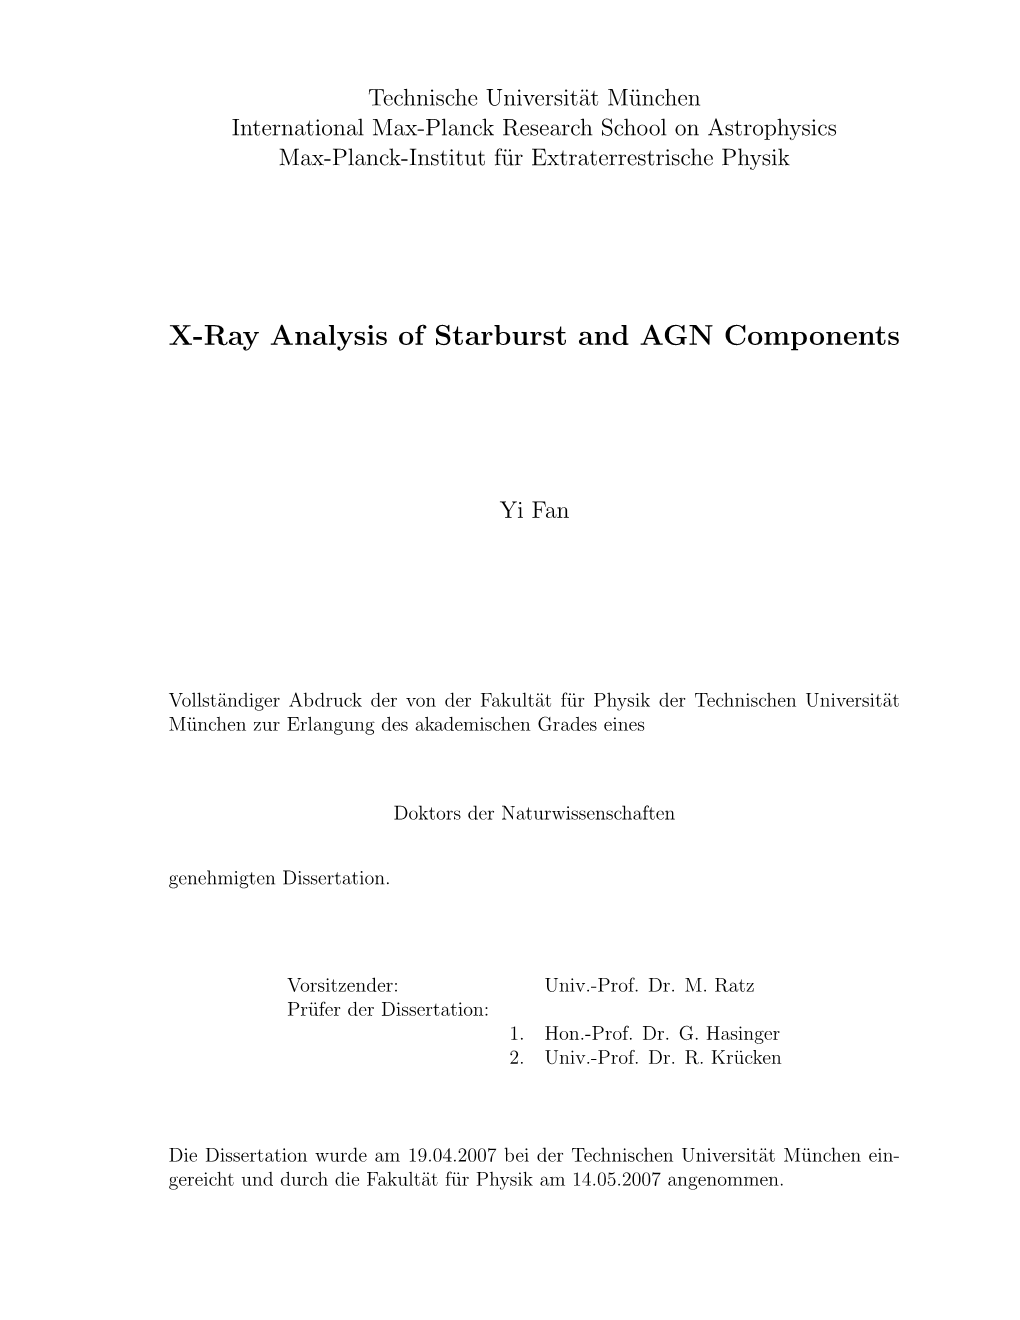 X-Ray Analysis of Starburst and AGN Components